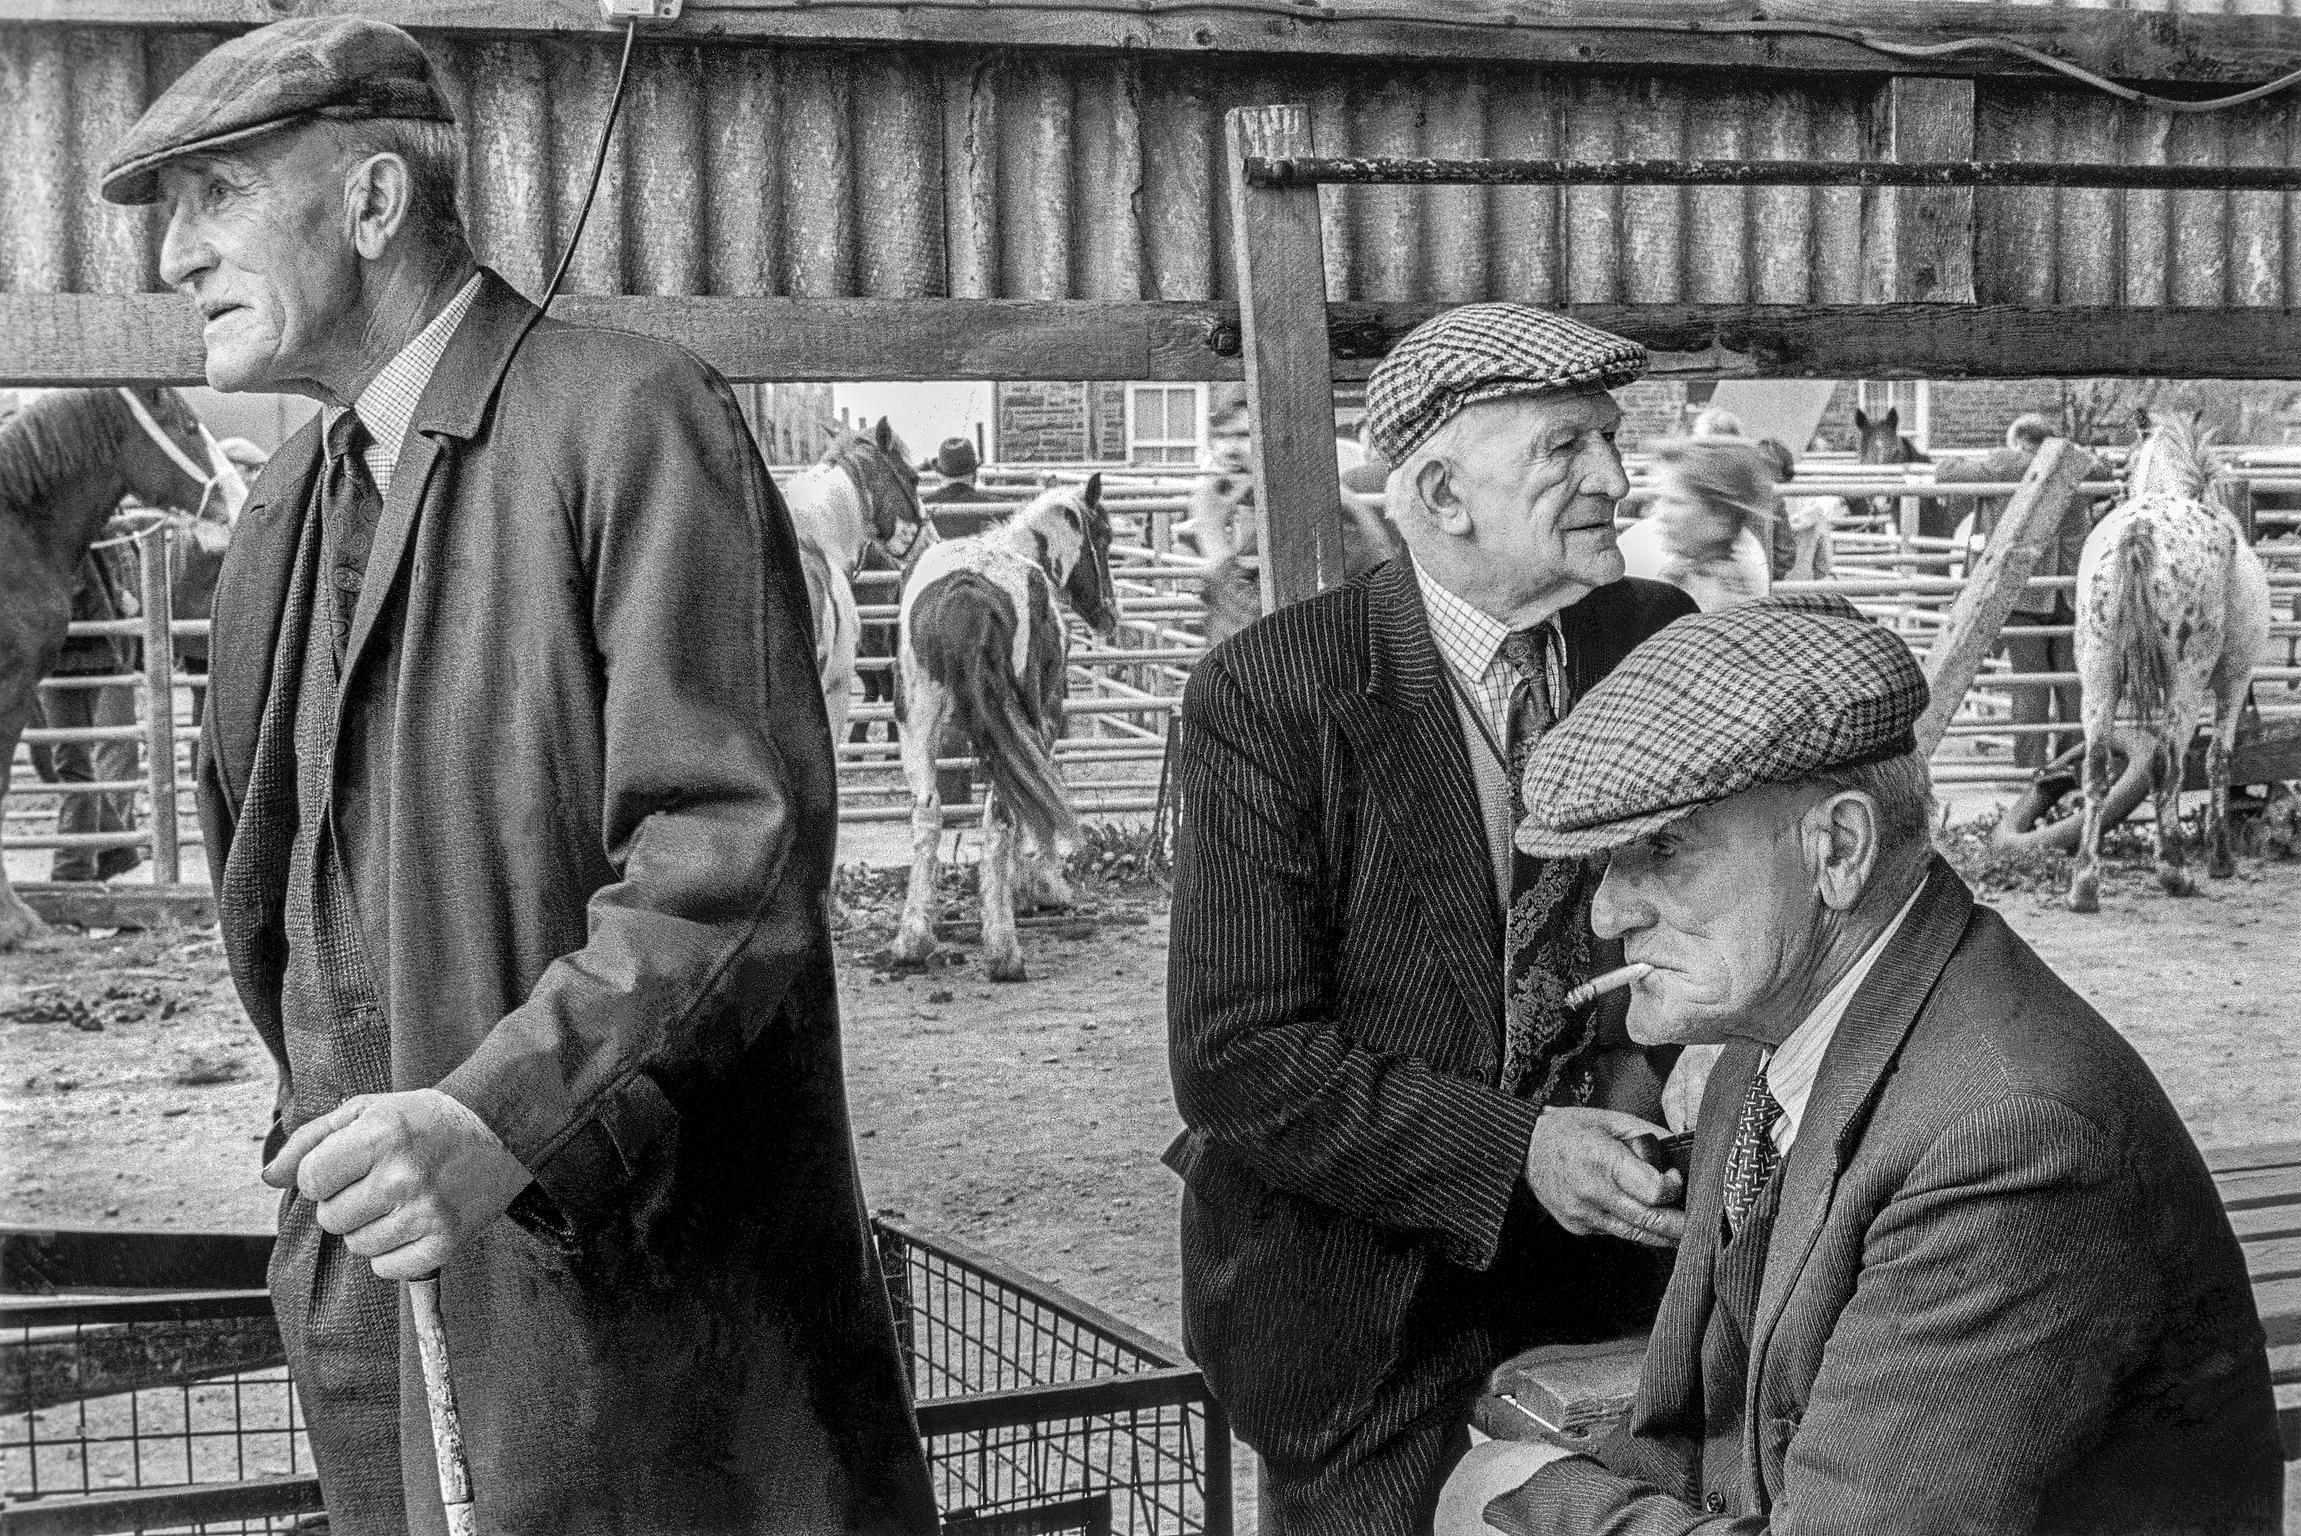 Farmers at the Llanybyther Horse Sales. Llanybyther, Wales